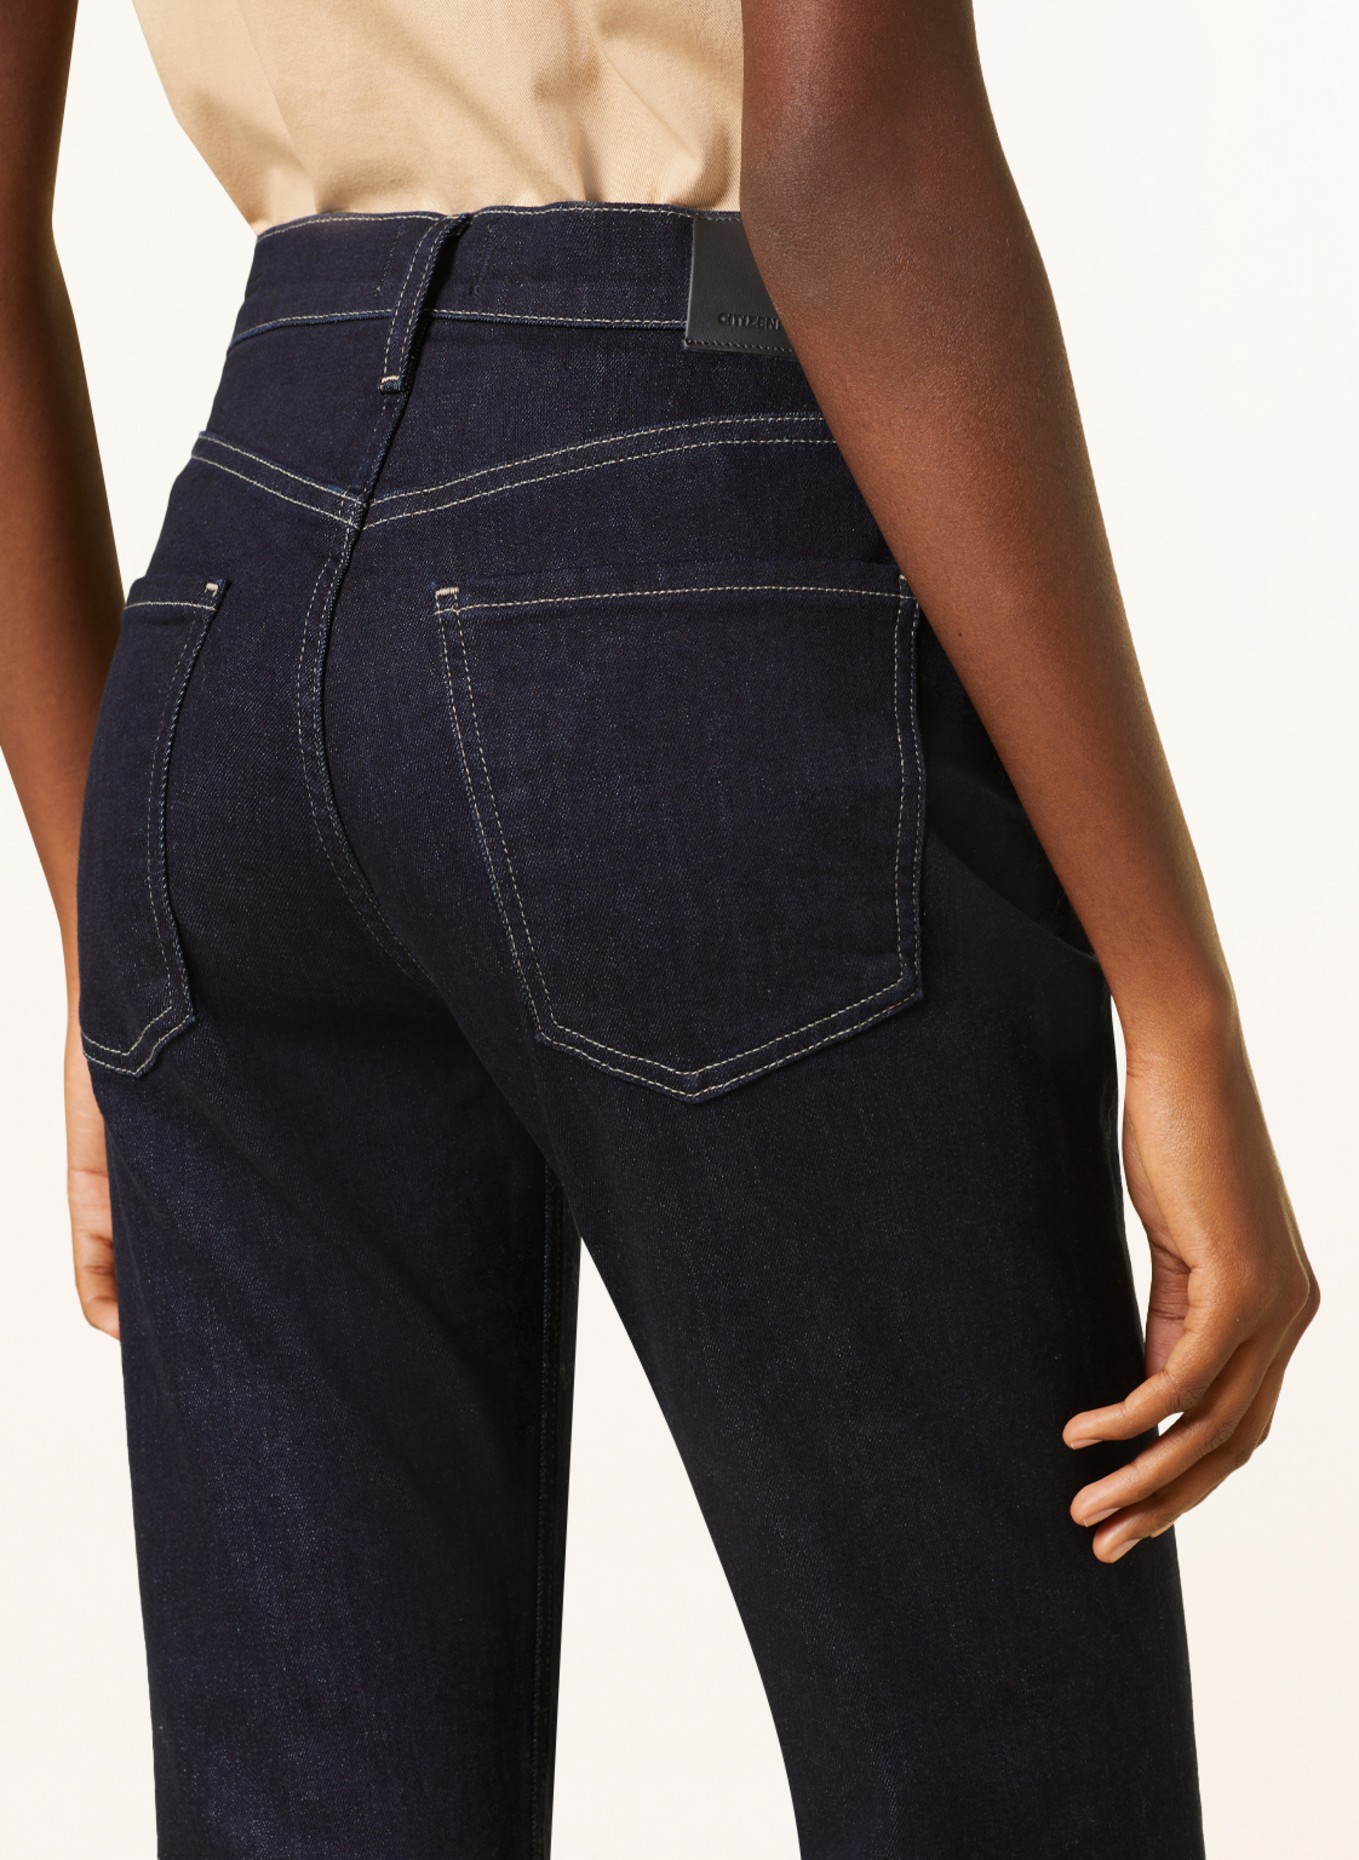 CITIZENS of HUMANITY Jeans ISOLA, Color: Solace dk indigo (Image 5)